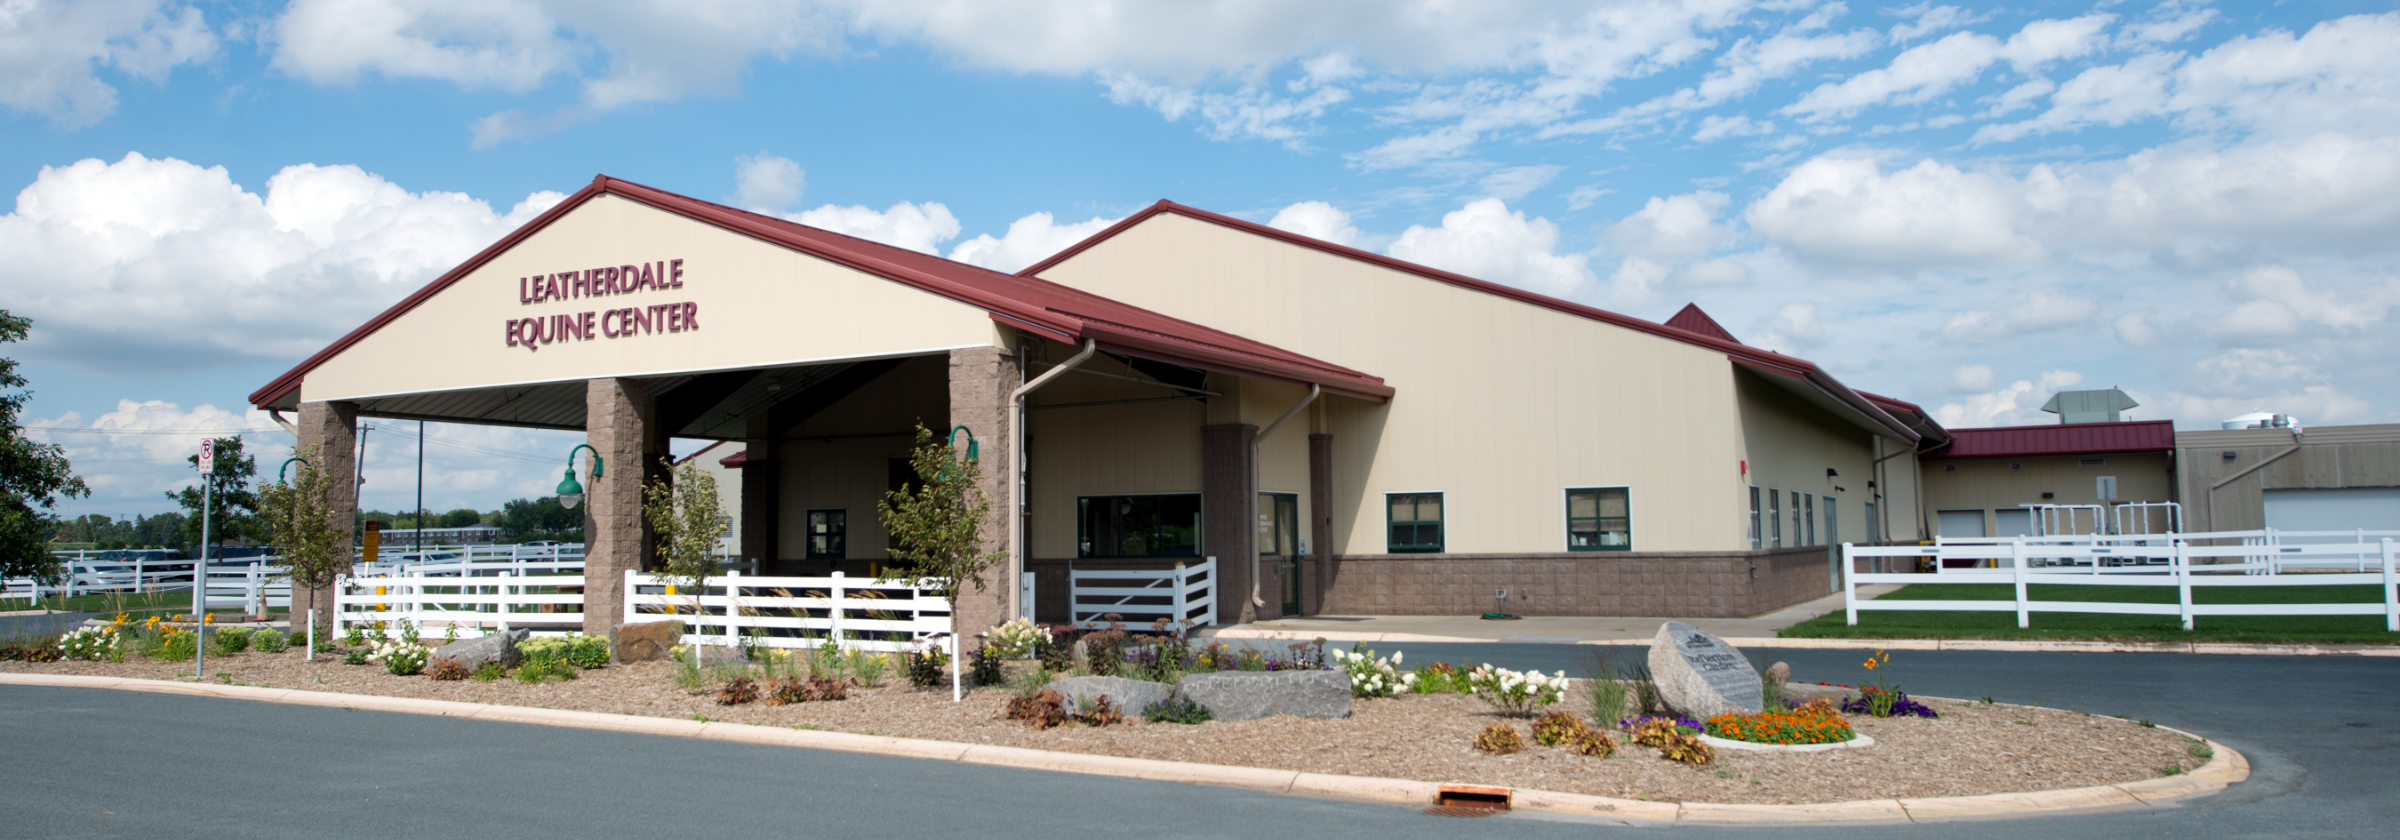 Leatherdale Equine Center building. Cream colored stucco building with maroon roof